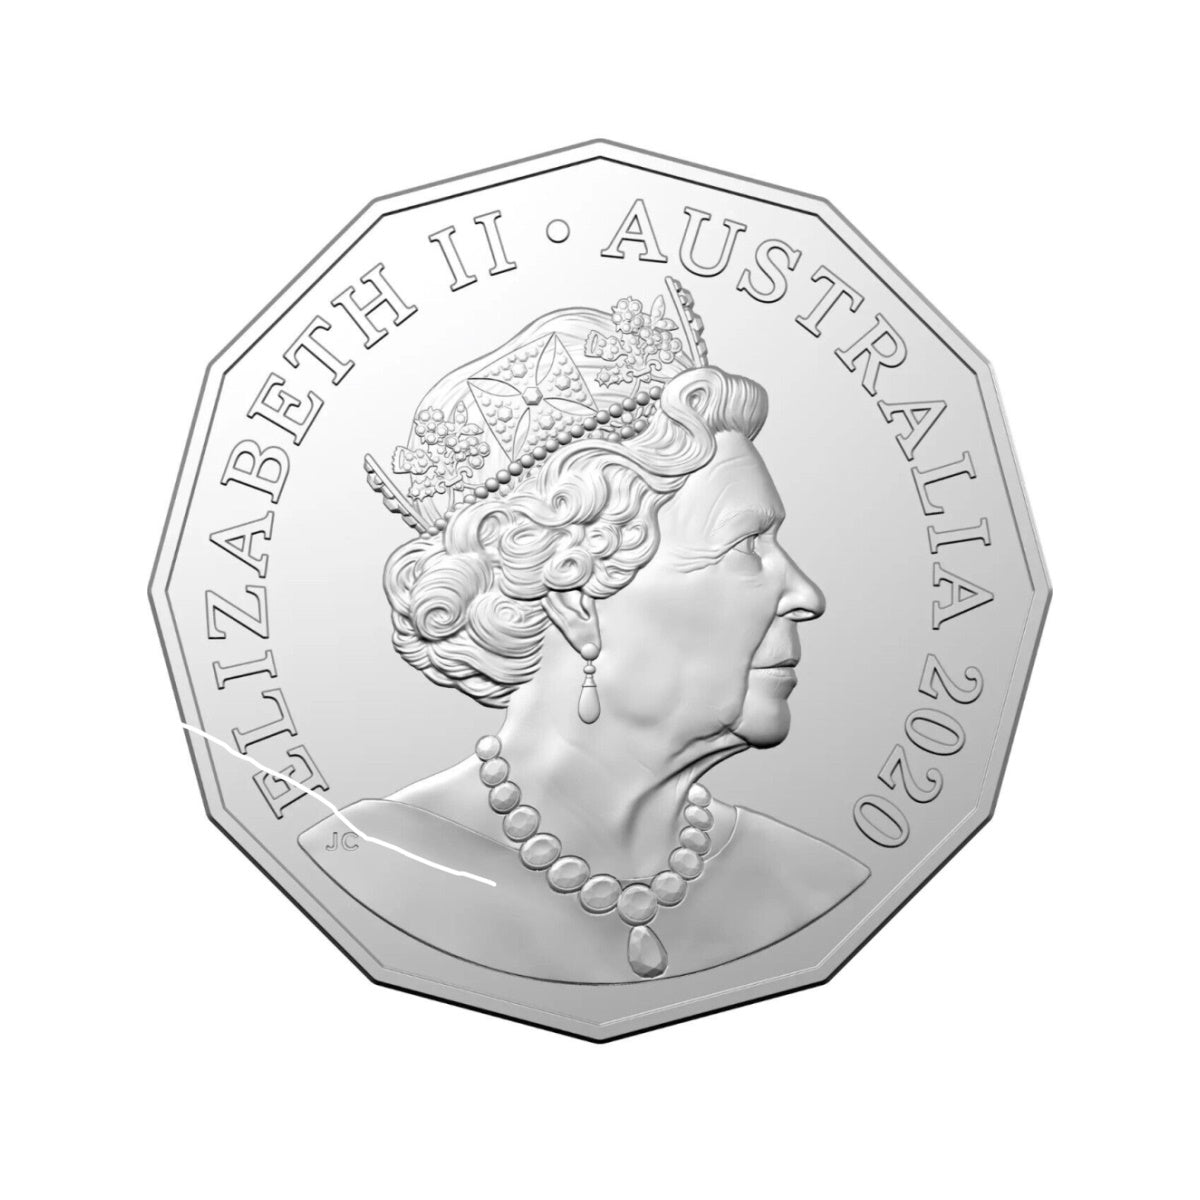 2020 Celebrating 50th Anniversary of Australia Indian Pacific Coloured 50c Coin